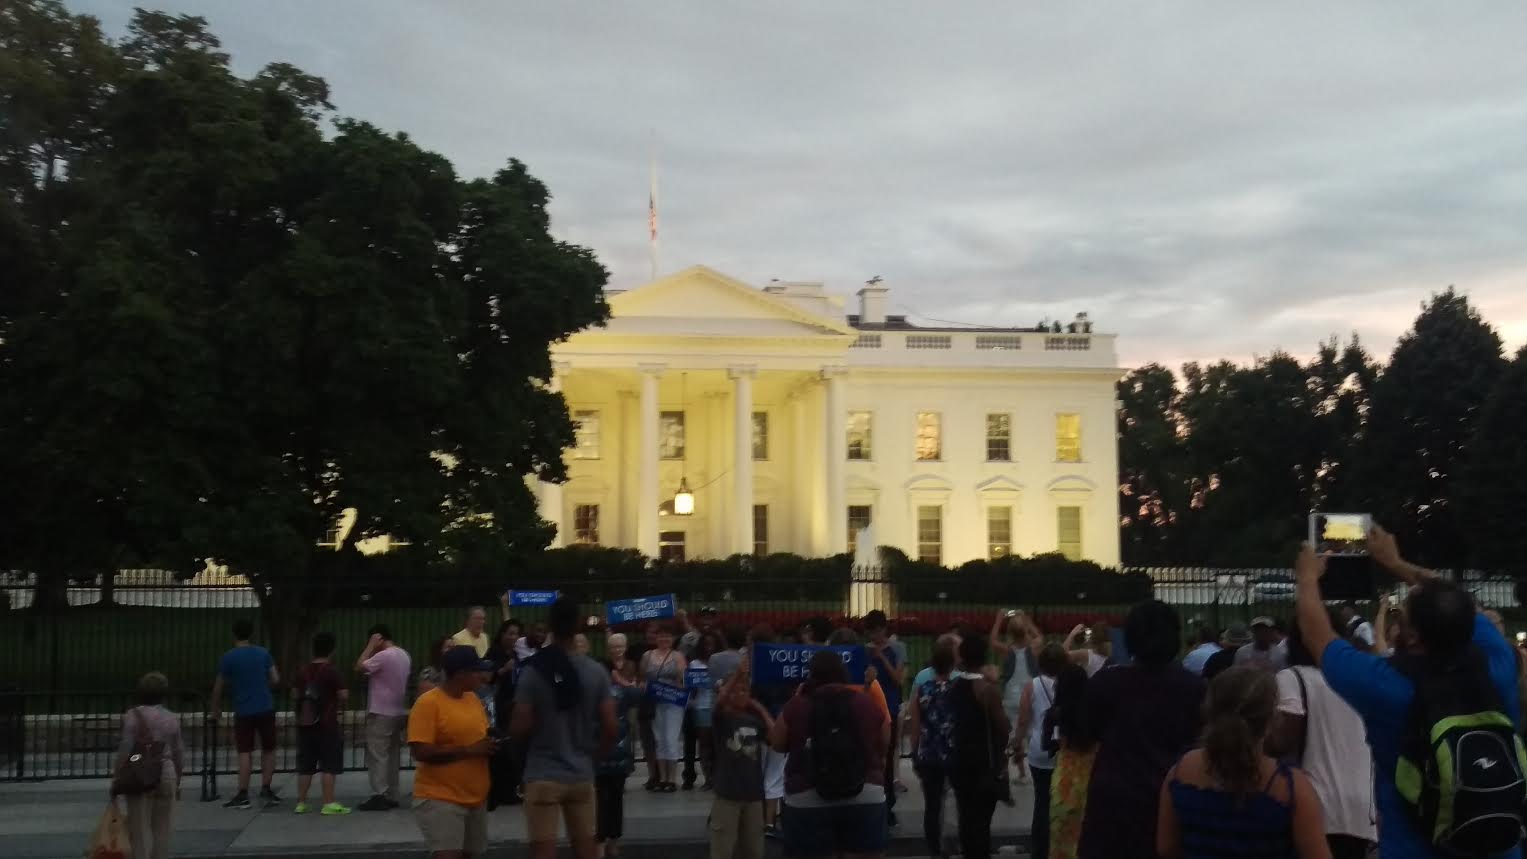 Pokemon GO Player Says He Put A Magikarp In The White House To Send A Message